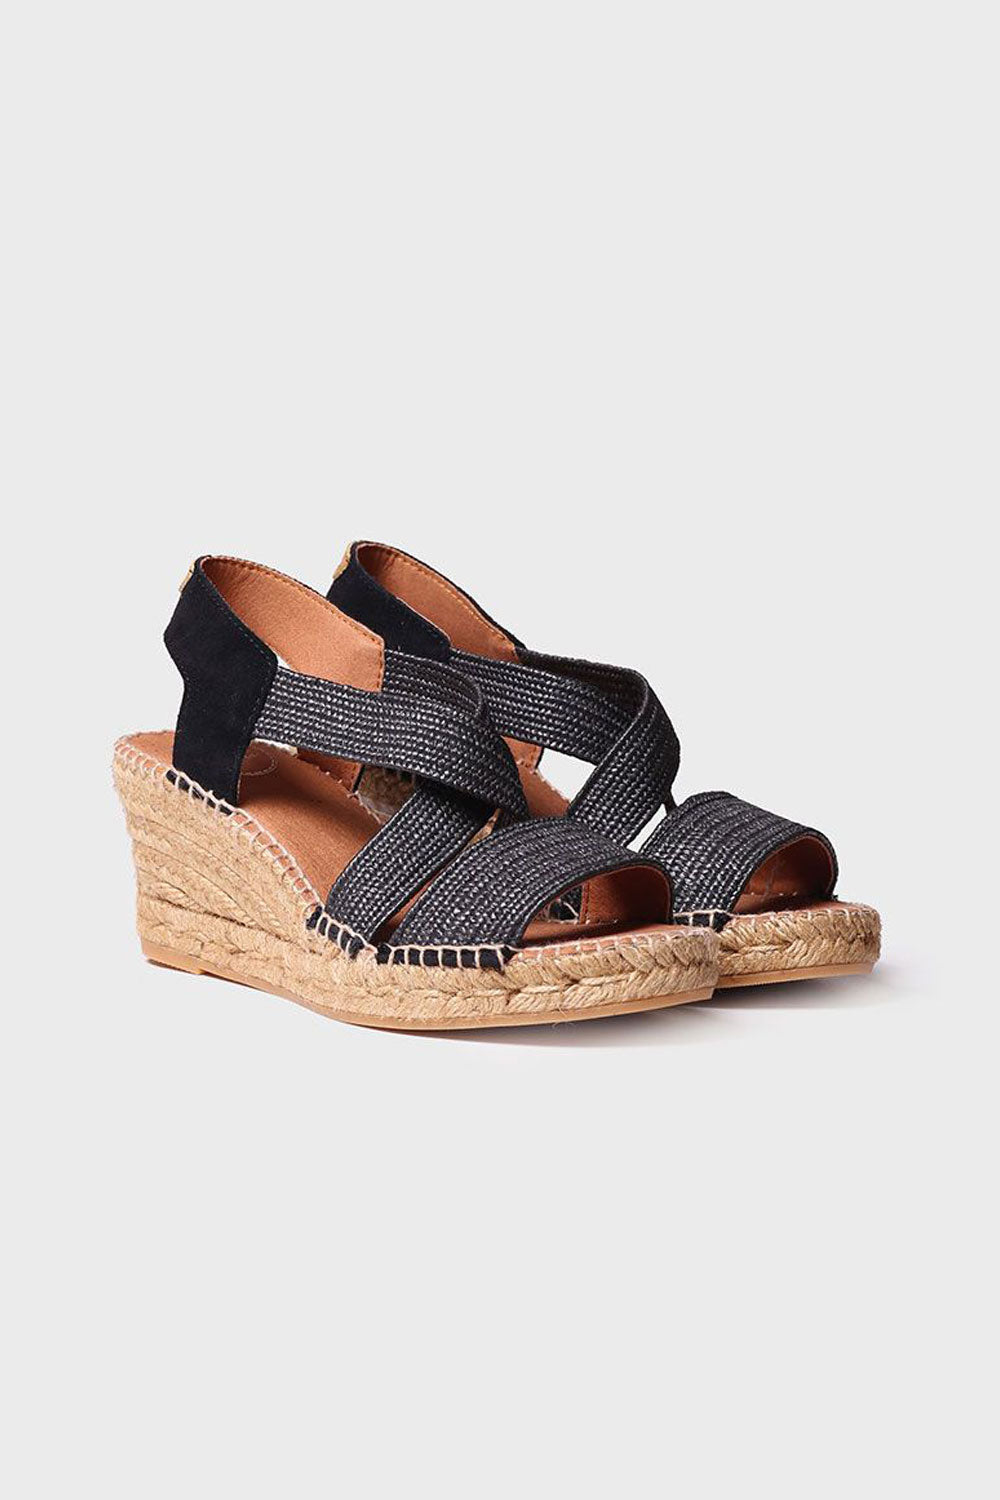 "Susa SP Negre" Wedge espadrille in fabric with elastic bands